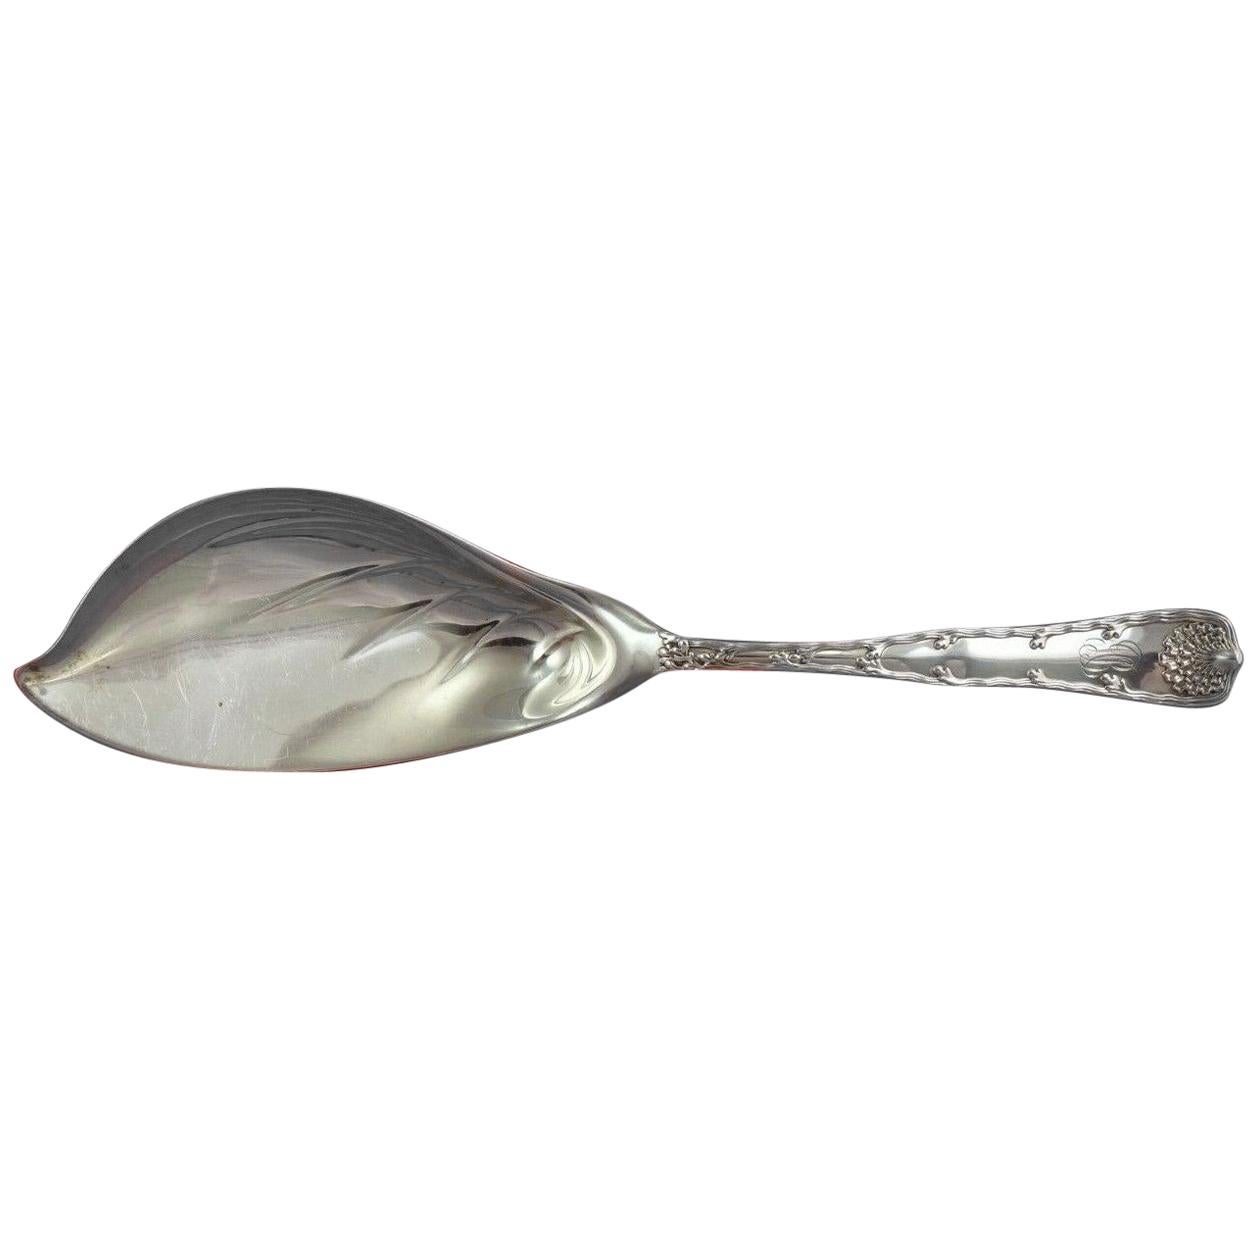 Wave Edge by Tiffany and Co Sterling Silver Ice Cream Server with Ridges